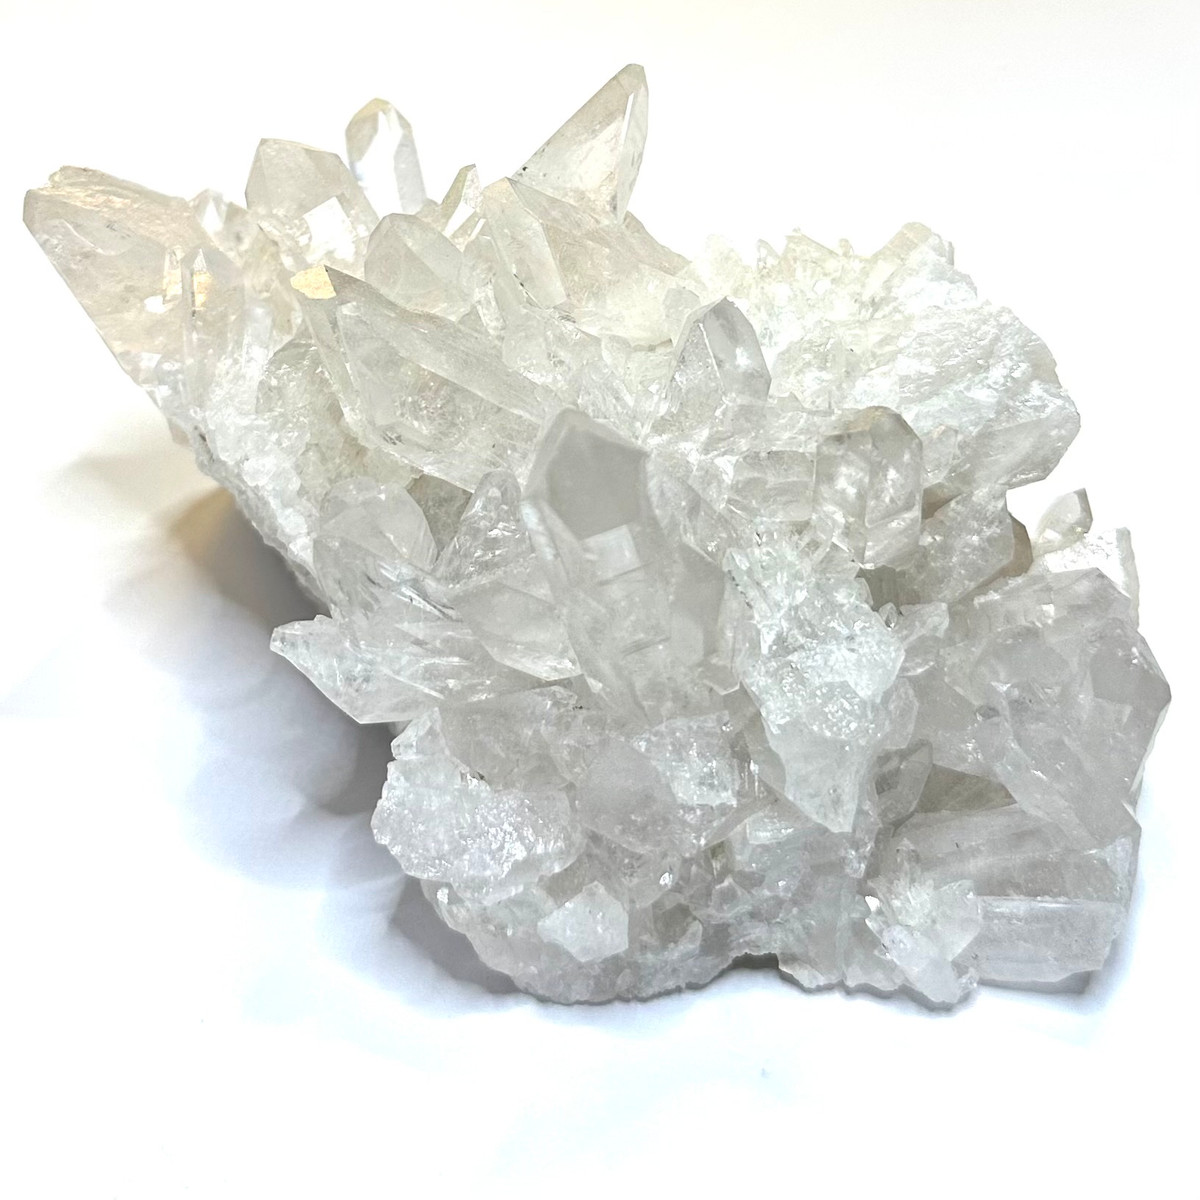 One of a Kind Quartz Crystal with Rainbow Inclusions Cluster-4 1/2 x 3"